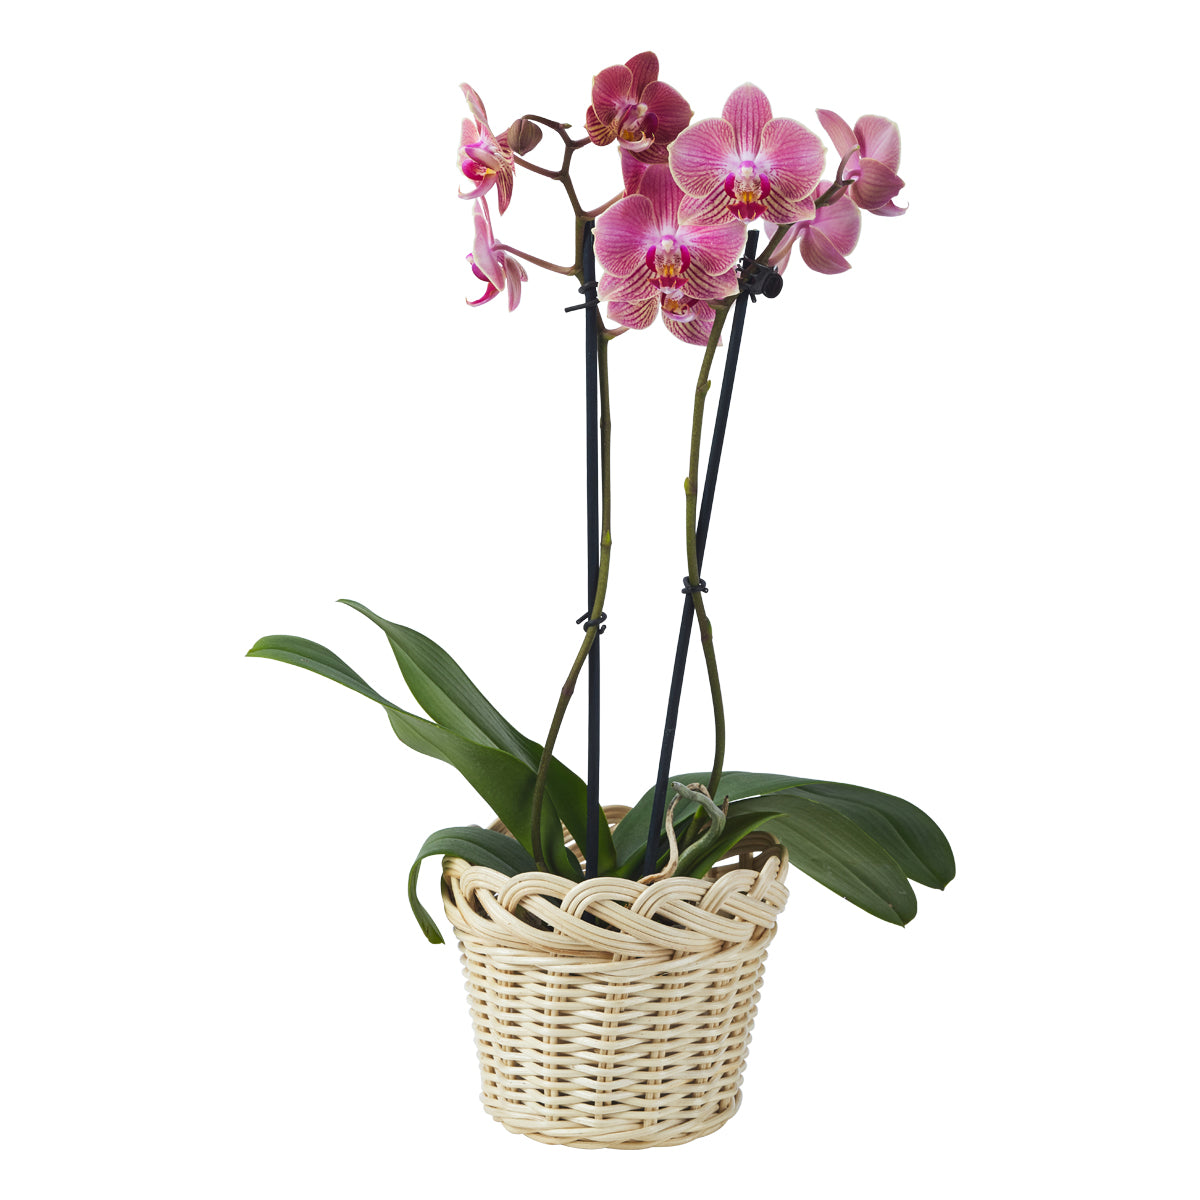 Braided Orchid Baskets Small, Set of 3